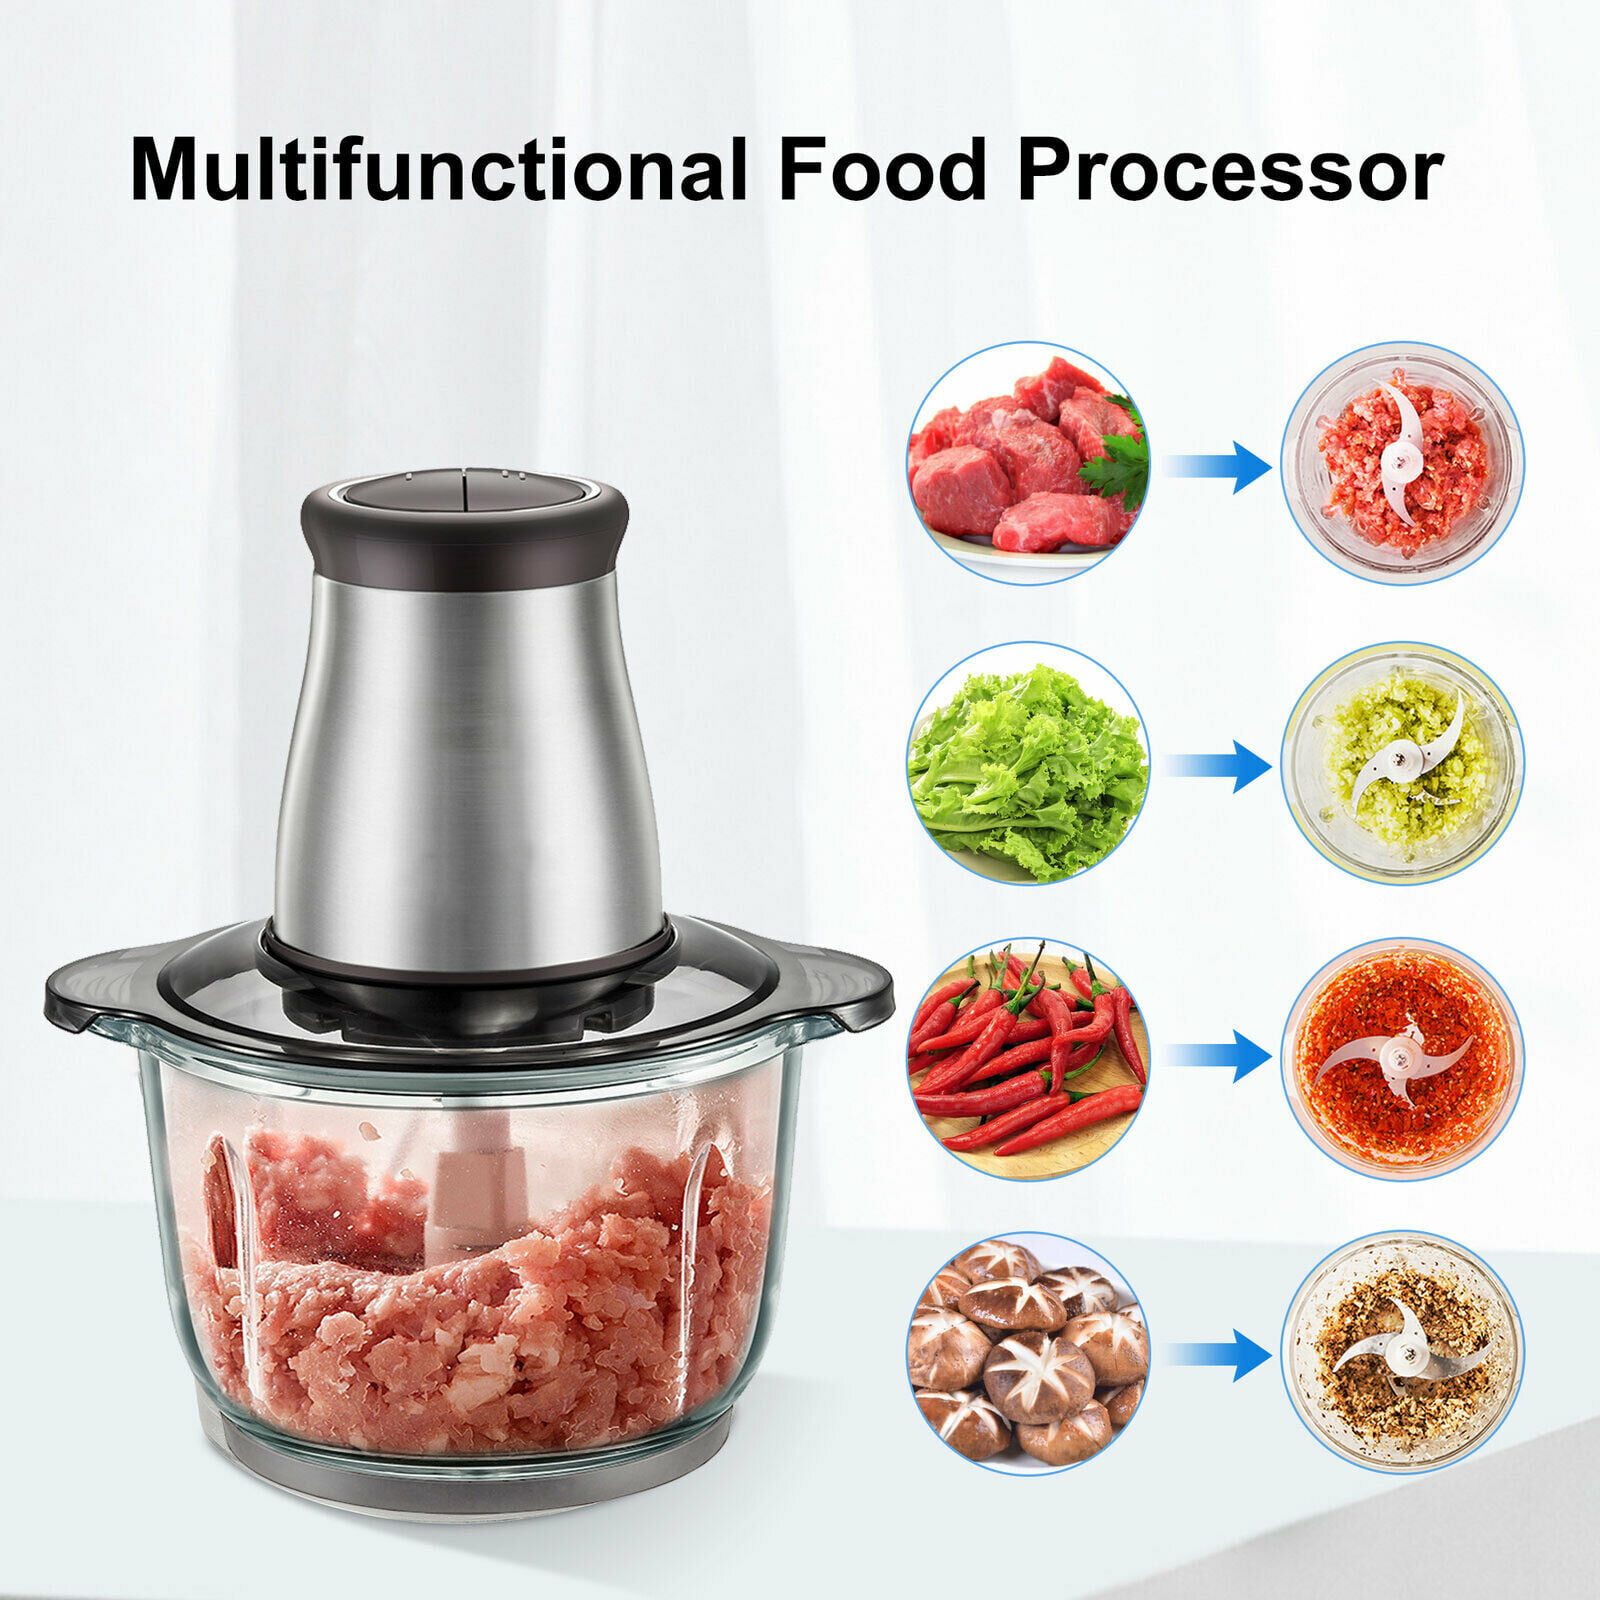 Qinkada Meat Grinder with 2 Stainless Steel Bowls, 500W Electric Food Processors, 3 Speed, 4 Bi-Level Bladesand Spatula for Baby Food, Meat, Onion, Ve